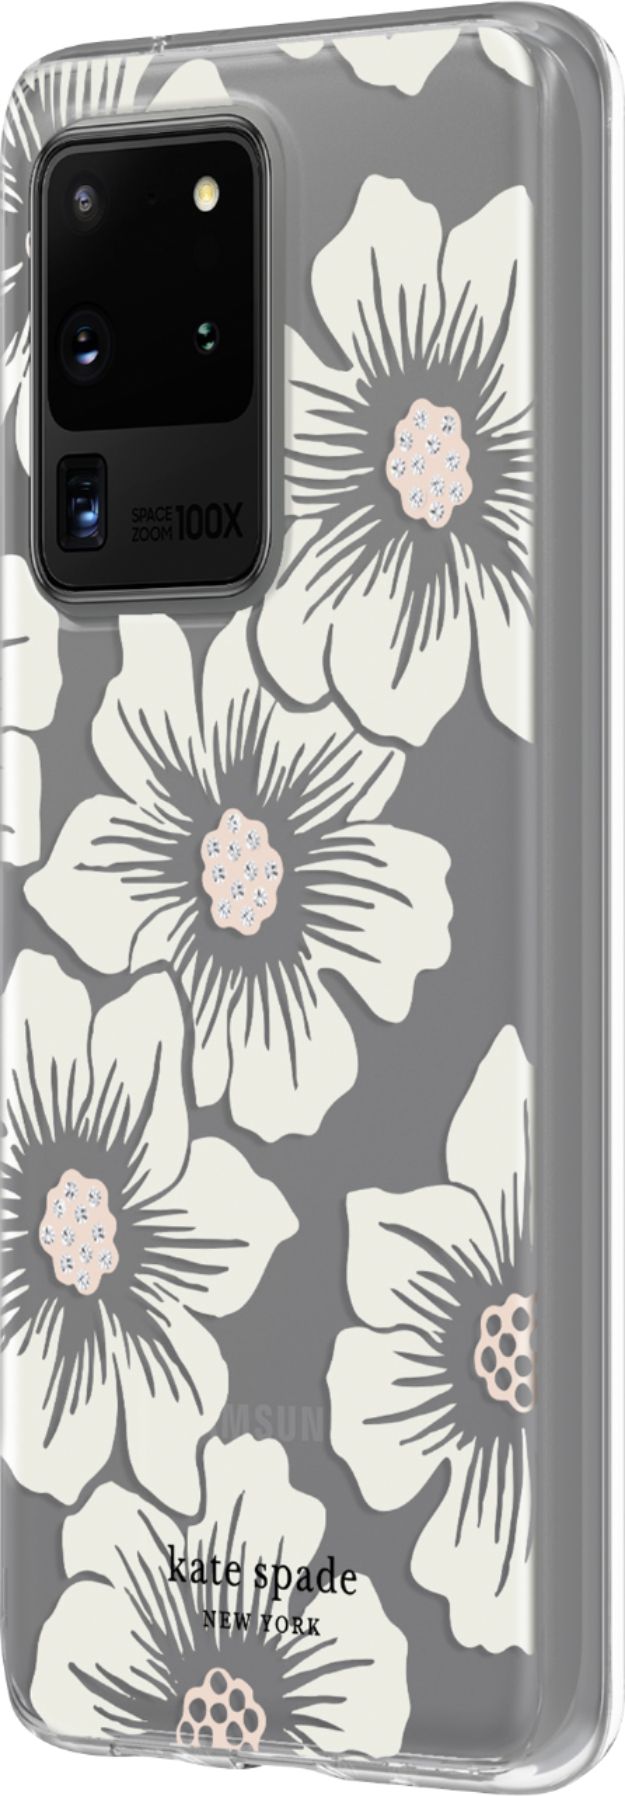 Left View: kate spade new york - Protective Hard-Shell Case for Samsung Galaxy S20 Ultra 5G - Hollyhock Floral Clear/Cream With Stones